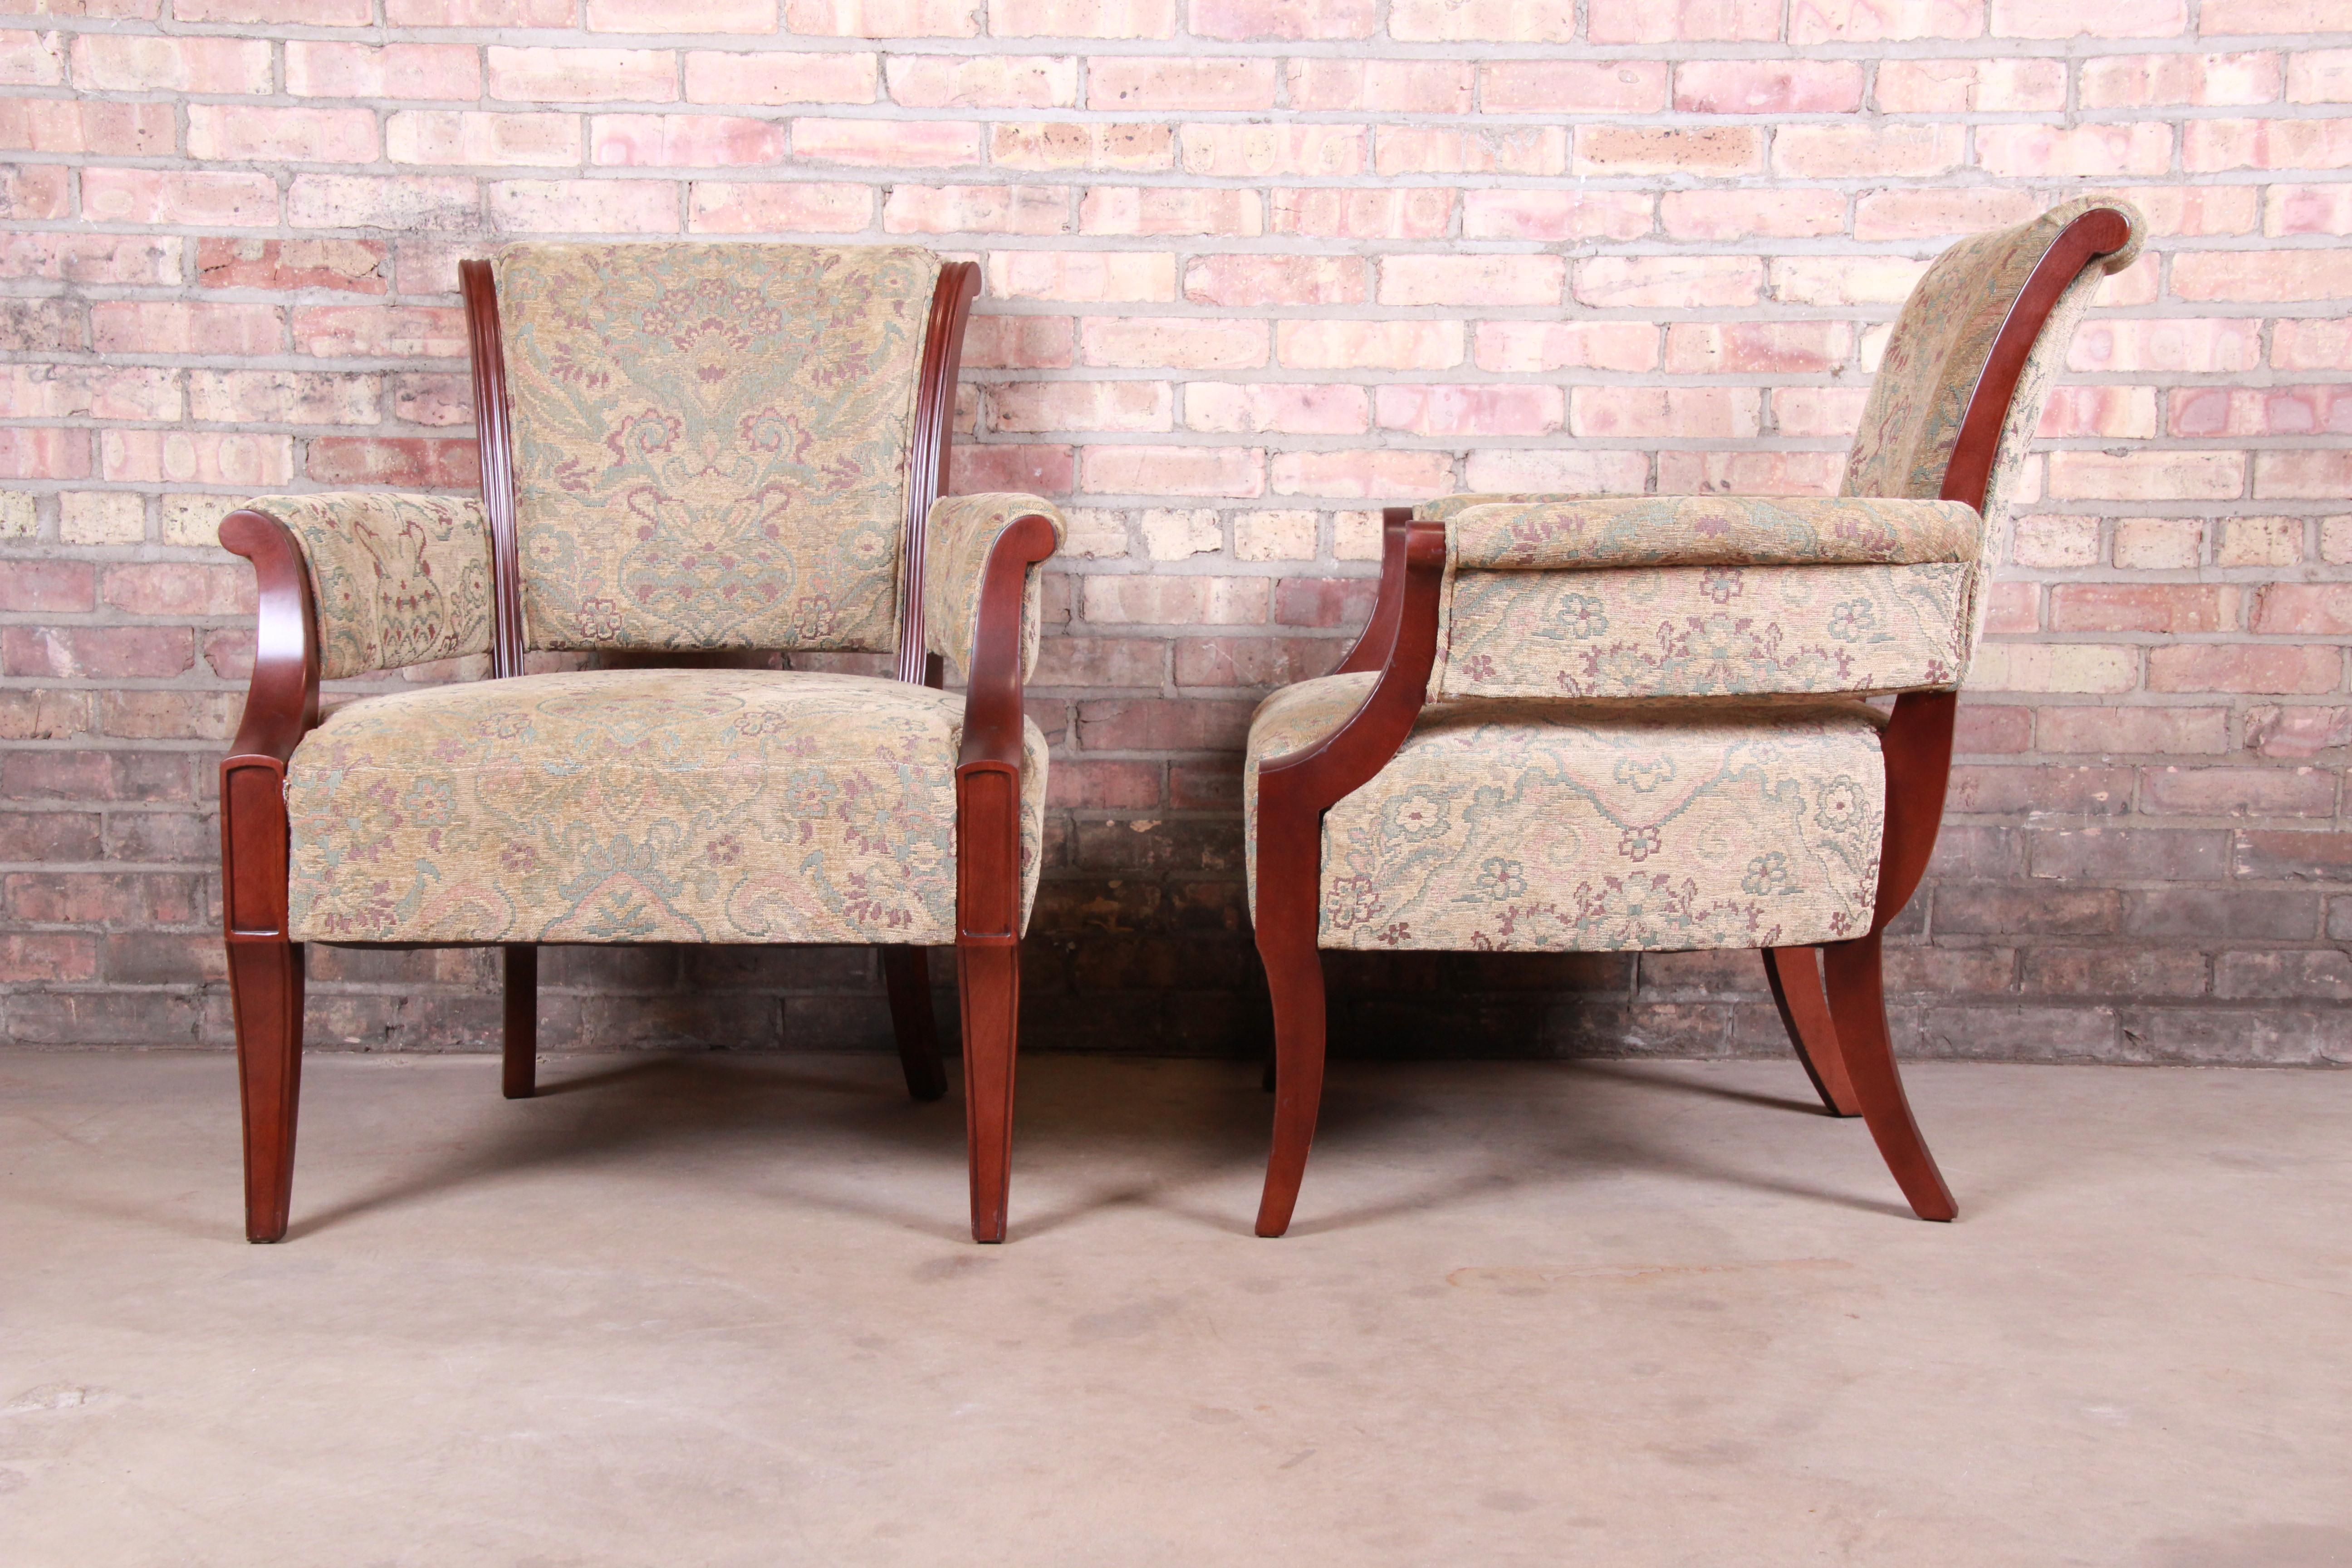 Upholstery Barbara Barry for Baker Furniture Modern Upholstered Lounge Chairs, Pair